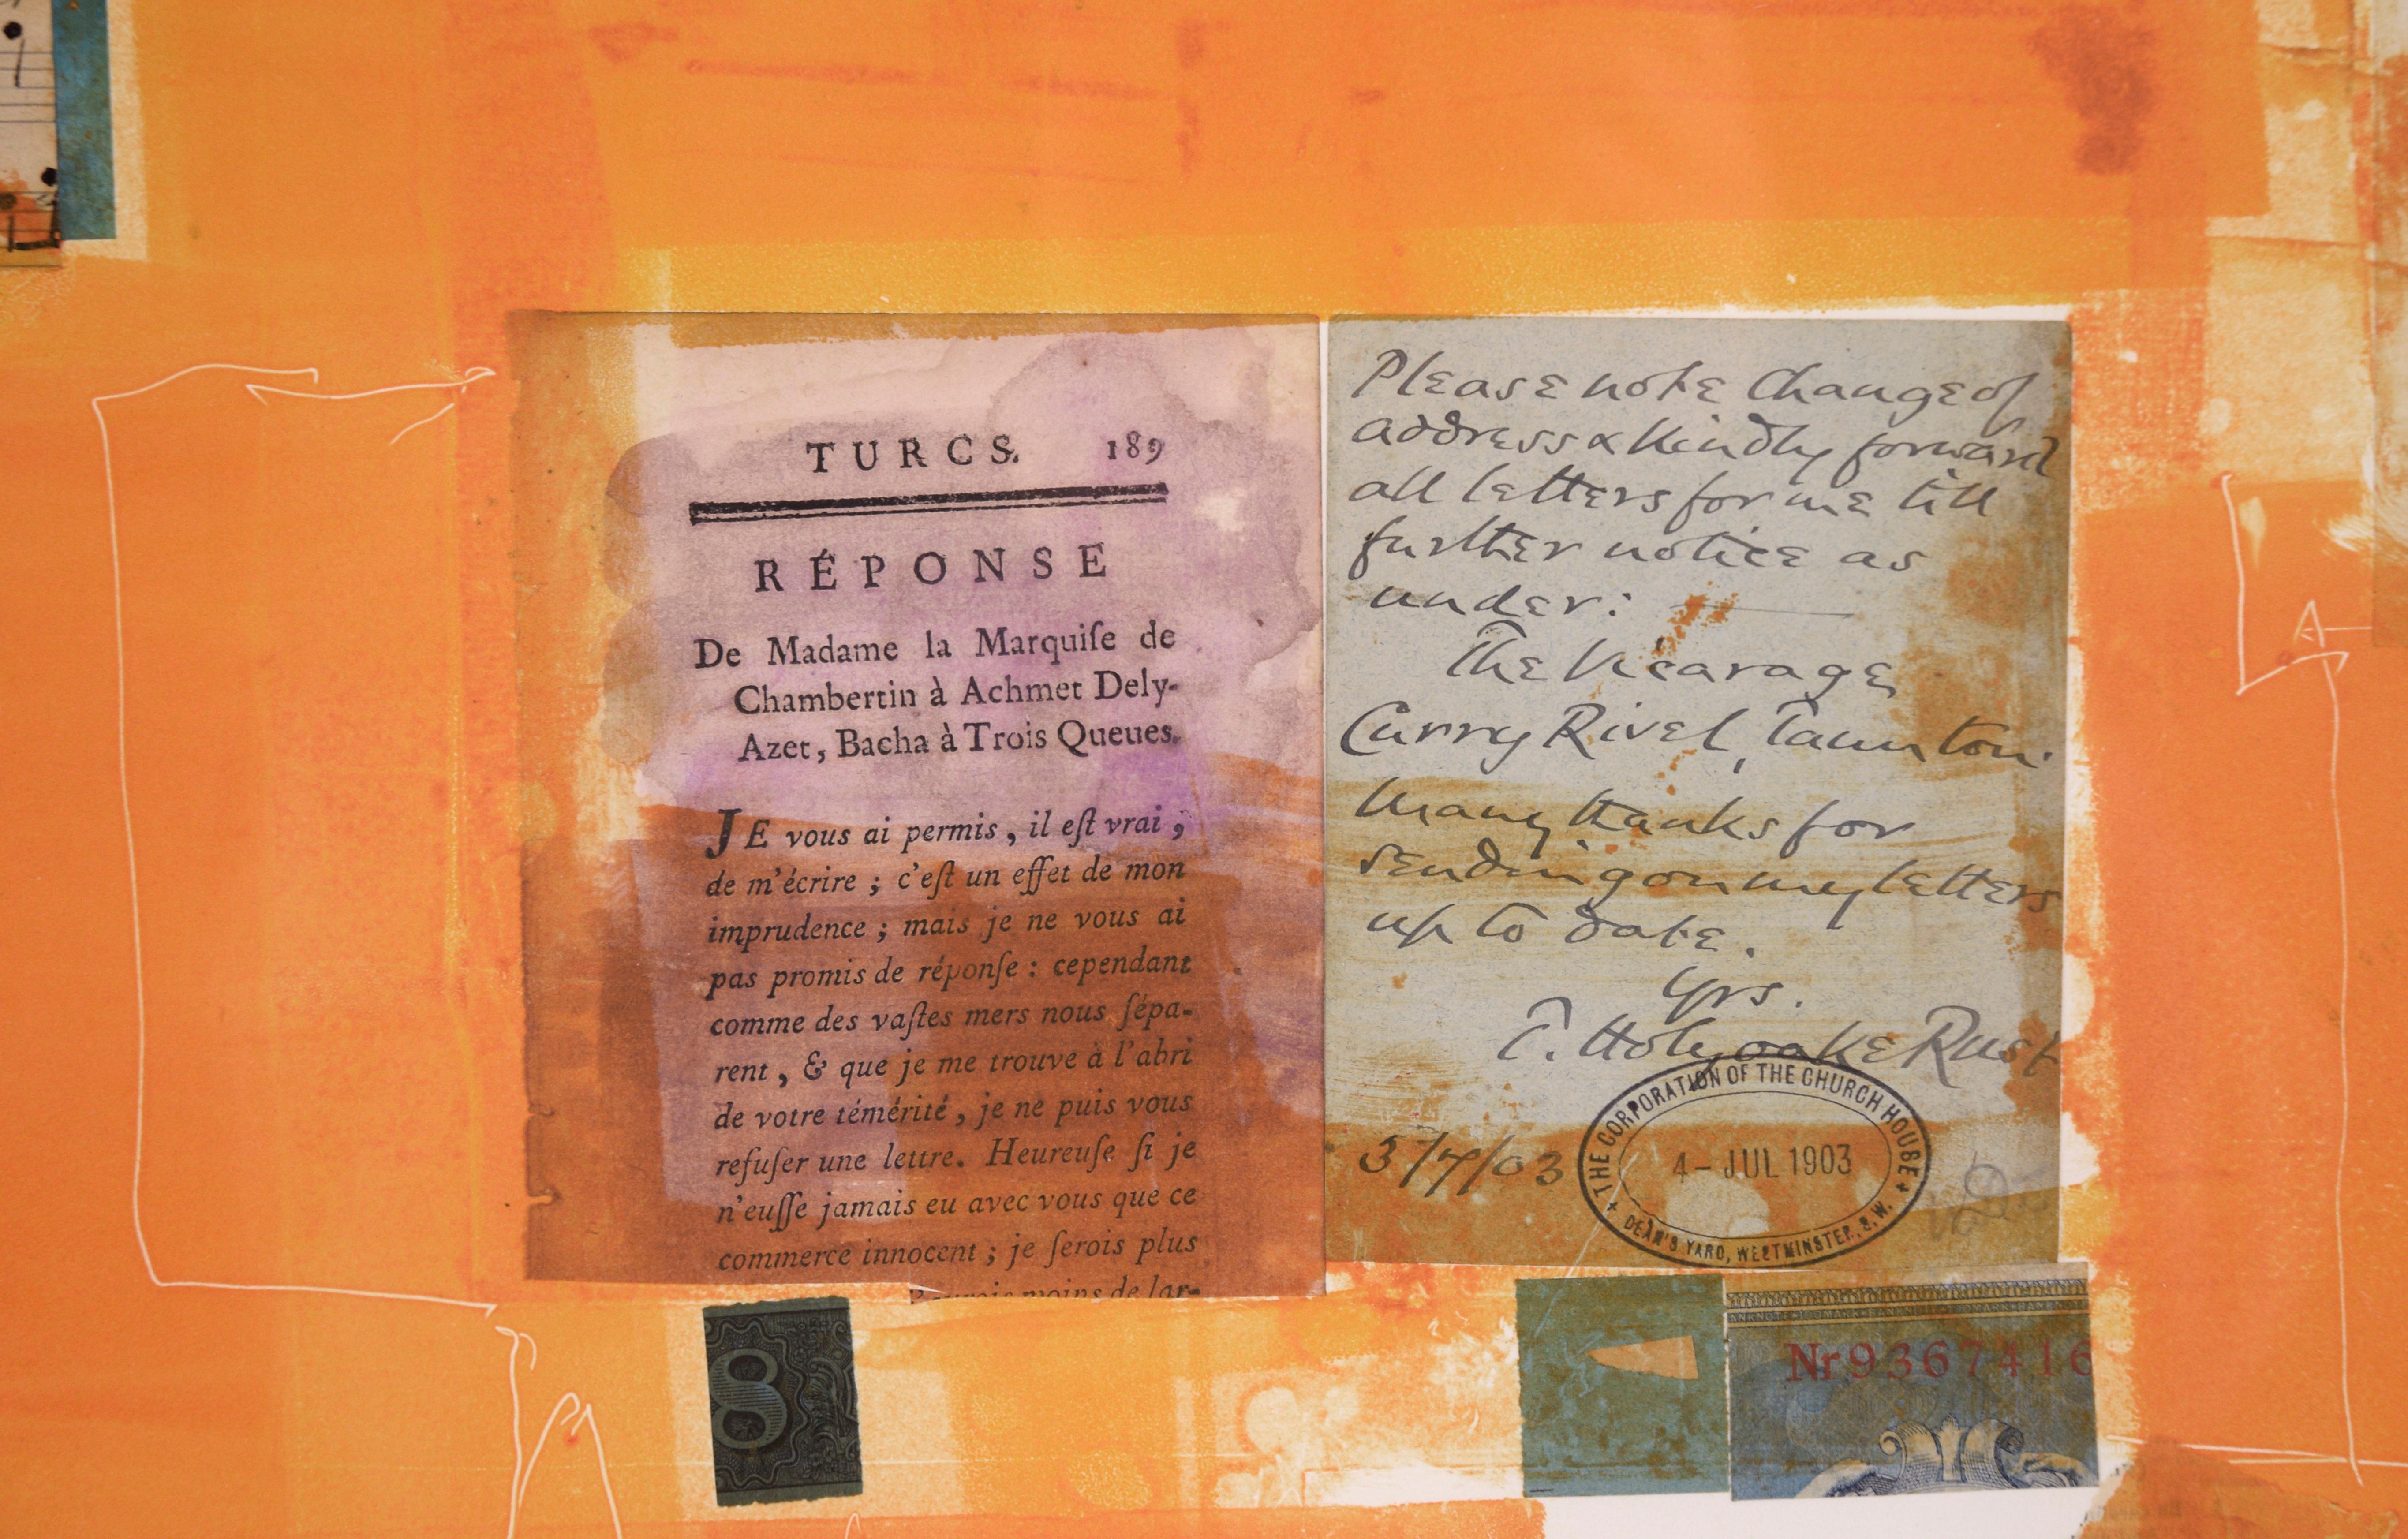 A vibrant contemporary teal and orange painting (Monotype) and found object collage composition of stamps, money, various types of paper, and watercolor by Michael Pauker (American, b. 1957). Signed in the lower right corner with the artist's